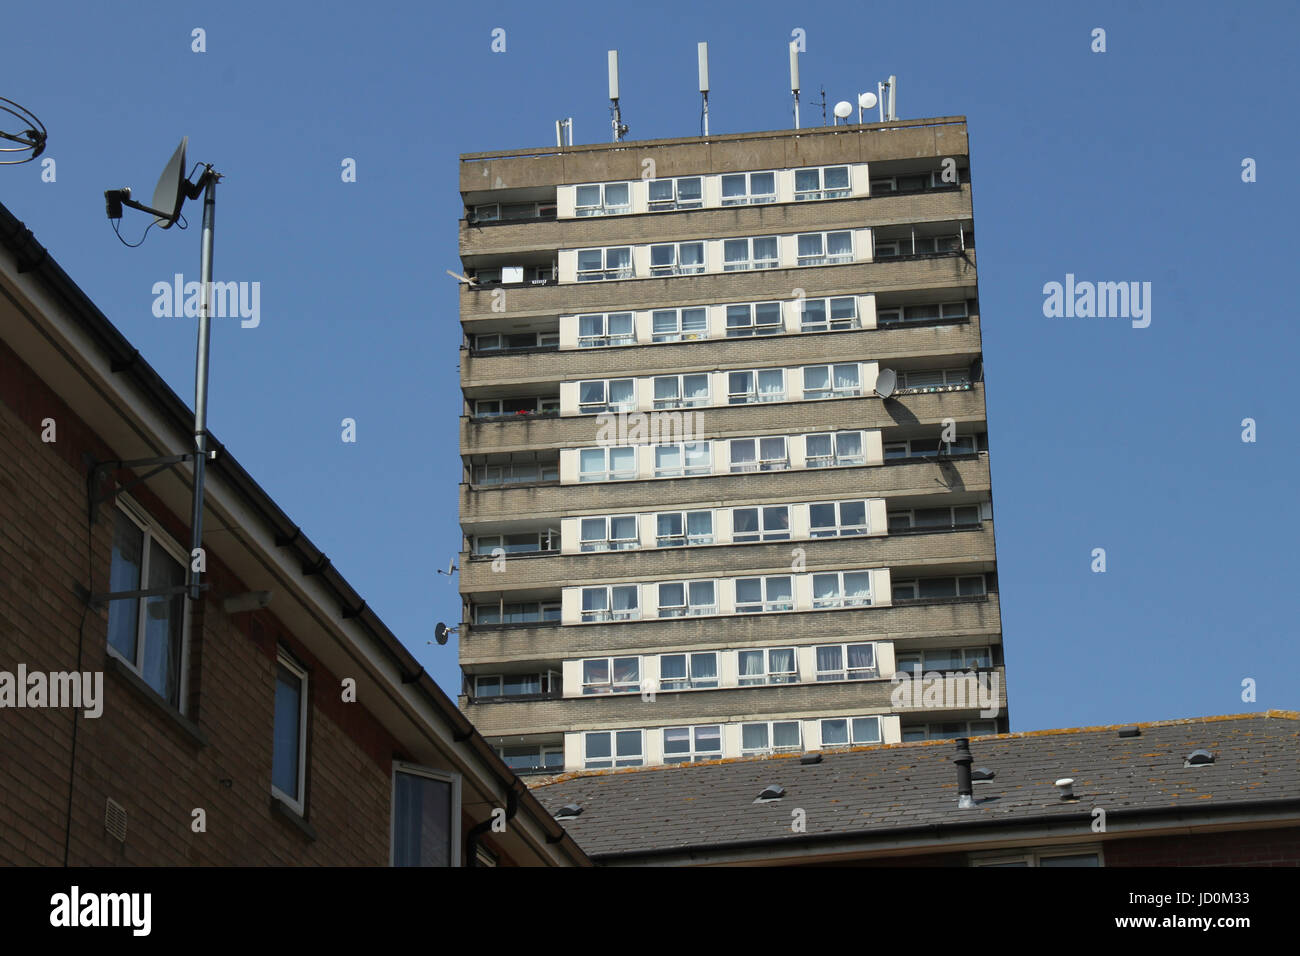 London, UK. 16th June, 2017 - Two tower block adjacent to Grenfell Tower block located in the borough of Kensington and Chelsea. At least 30 people have bene confirmed dead with about 70 missing and feared dead form the Granfell Tower fire. Credit: David Mbiyu/Alamy Live News  ​ Stock Photo